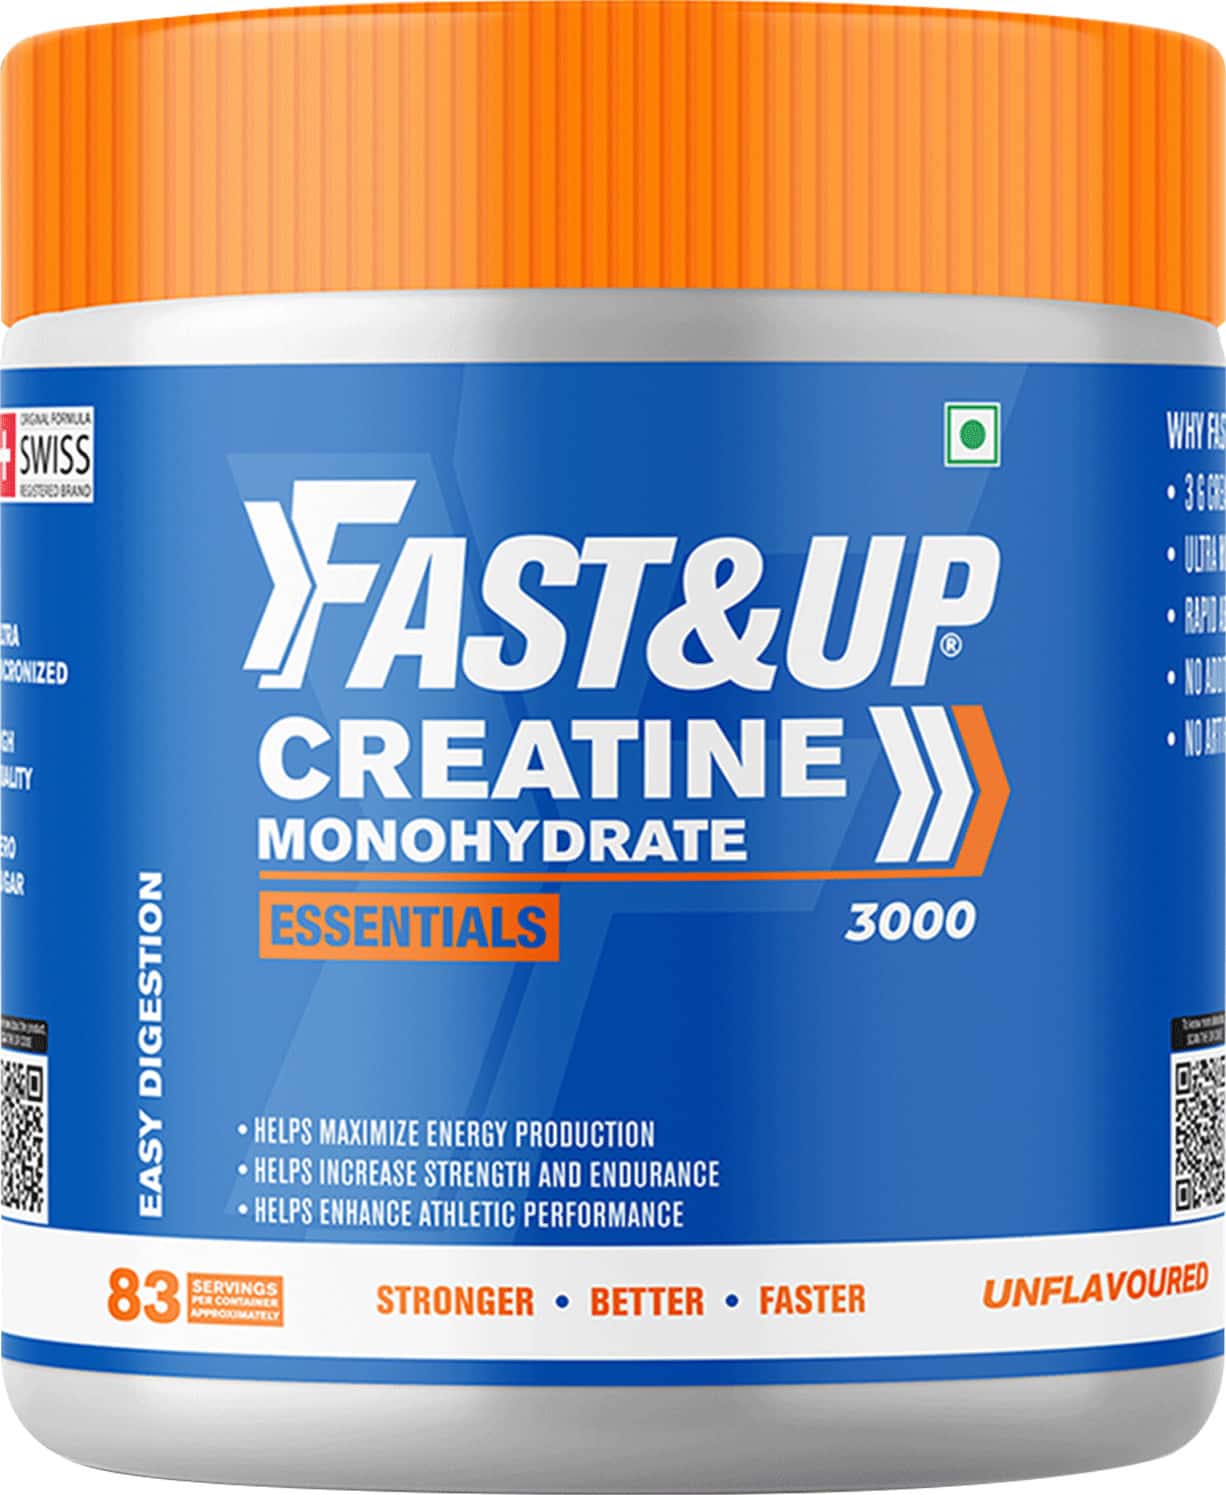 Fast&Up Creatine Monohydrate Essentials-For Longer Workout Muscle Recovery-83 Serving(Unflavored)